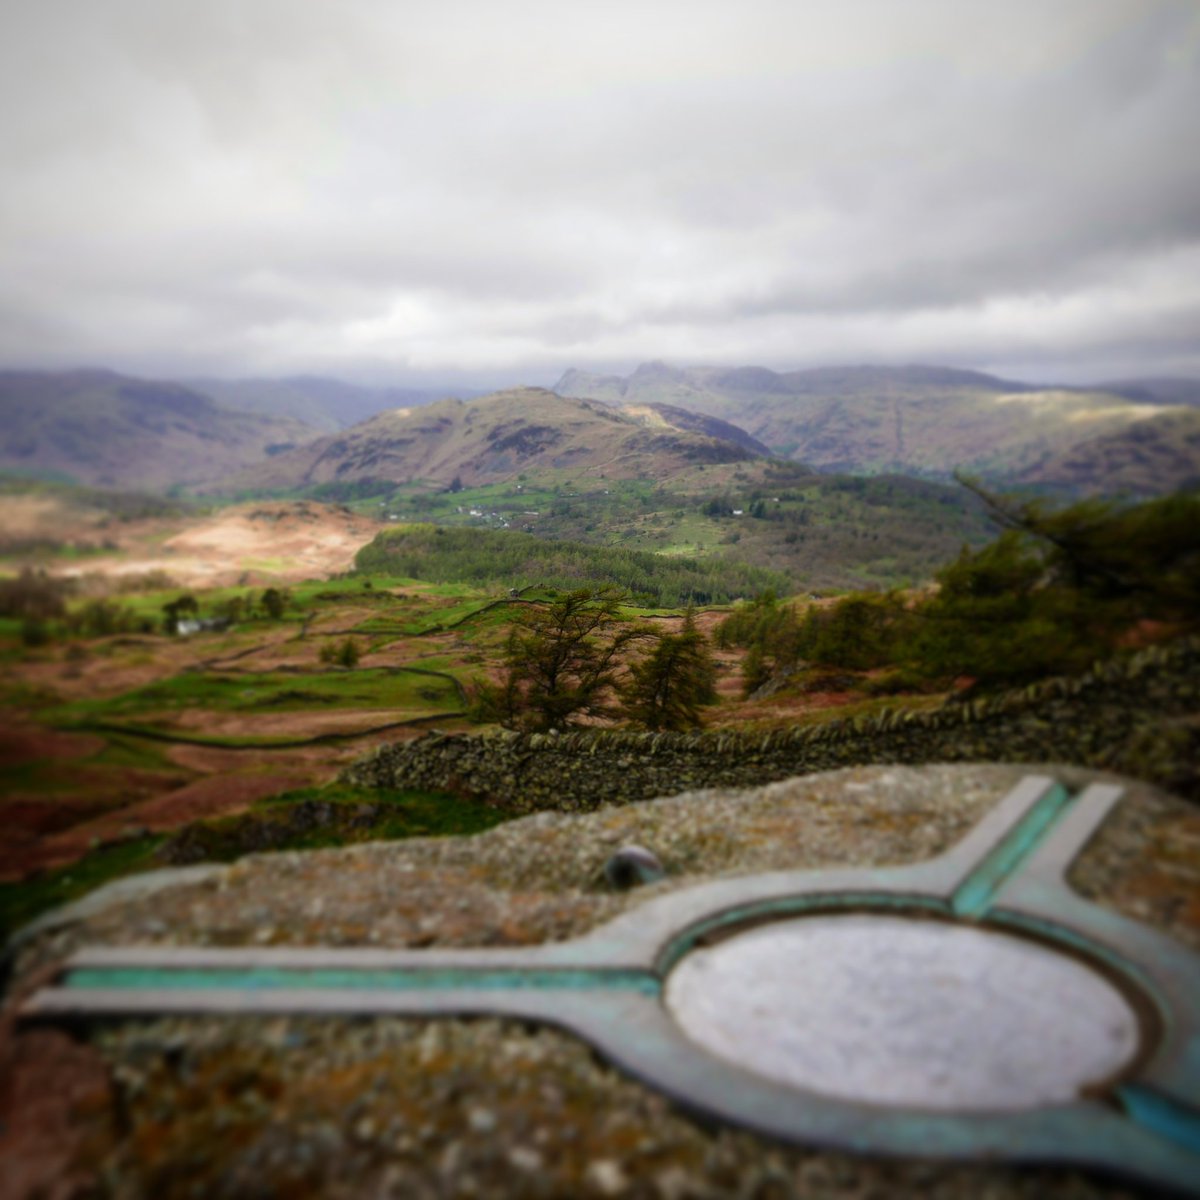 Lovely morning walk from tarn how's to black crag view were amazing... #notjustlakes #LakeDistrict #cumbria #blackcrag #NationalTrust #tarnhows #Walking #Hiking #HikingintheLakes #lagdalepikes #lingmoor #landscapephotography